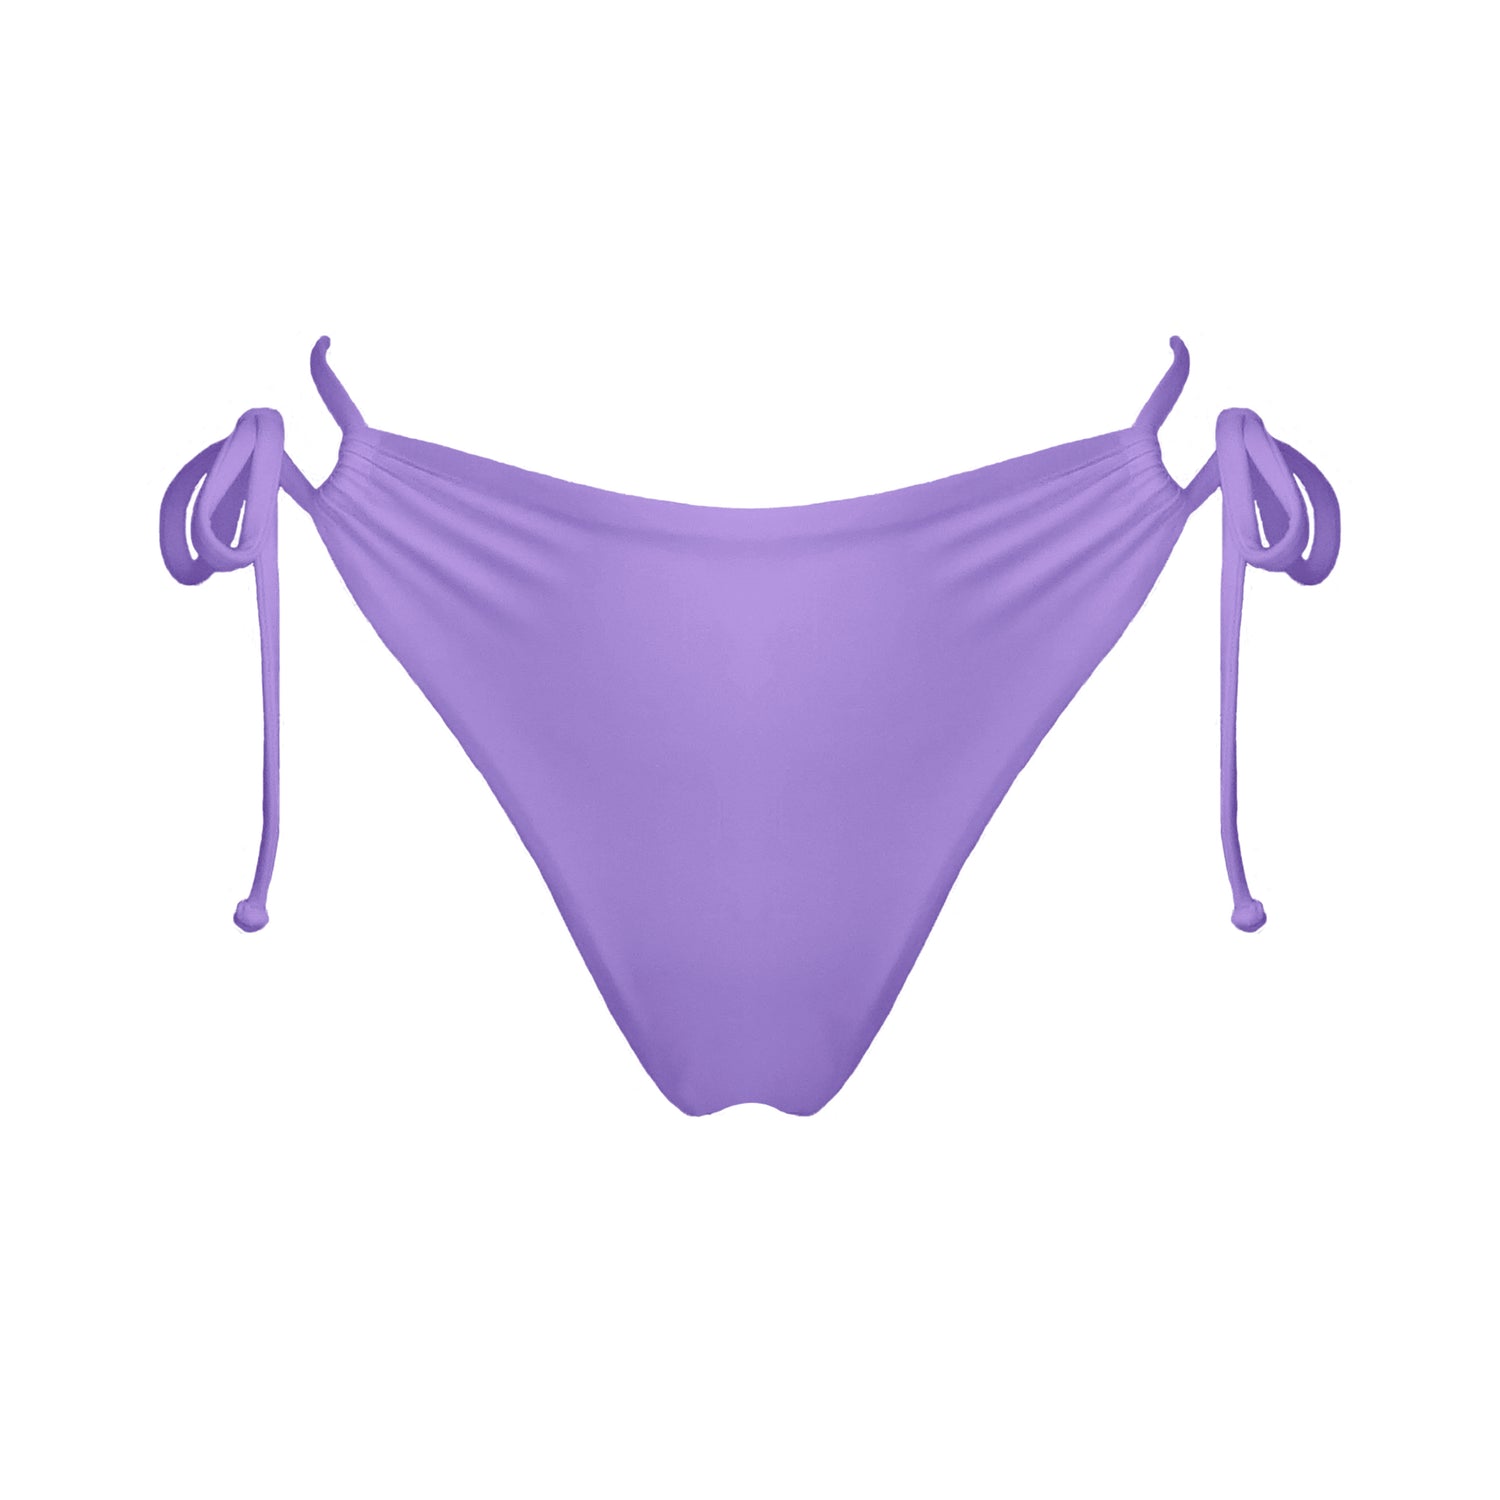 Pastel purple strappy mid-rise bikini bottoms with high cut legs and cheeky coverage.